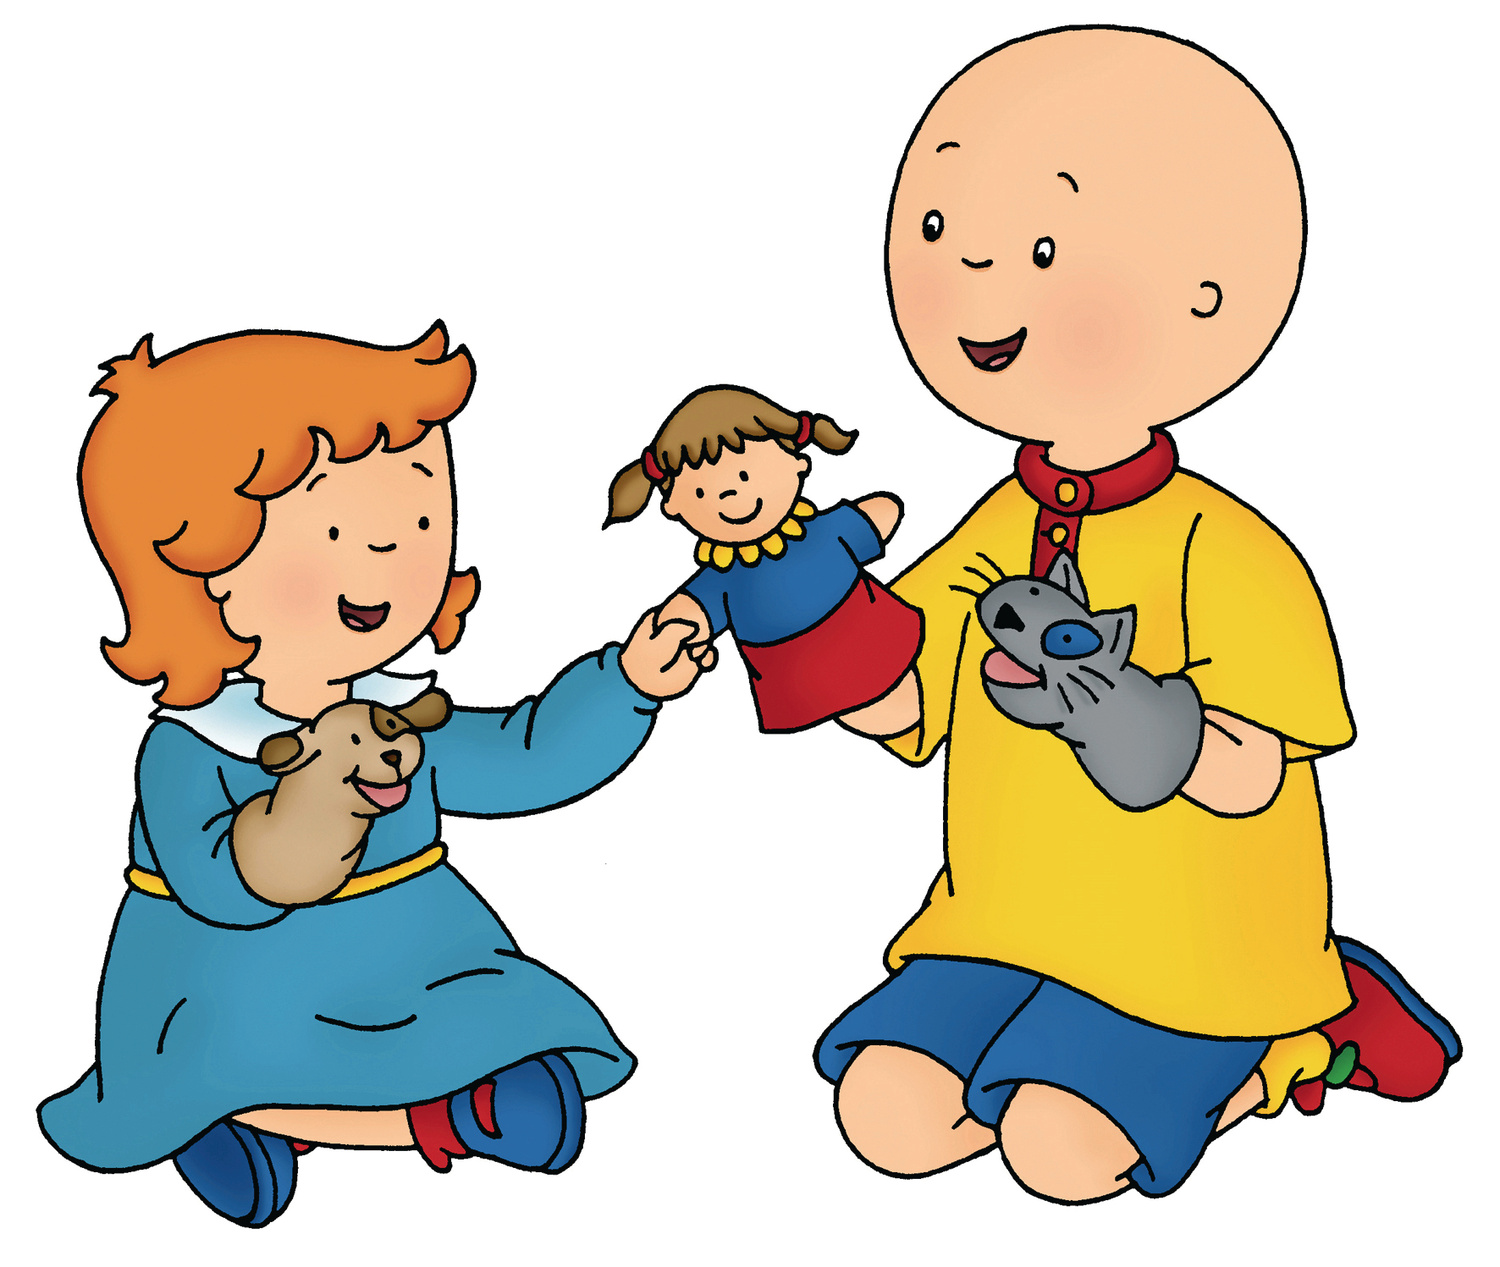 Caillou puppet